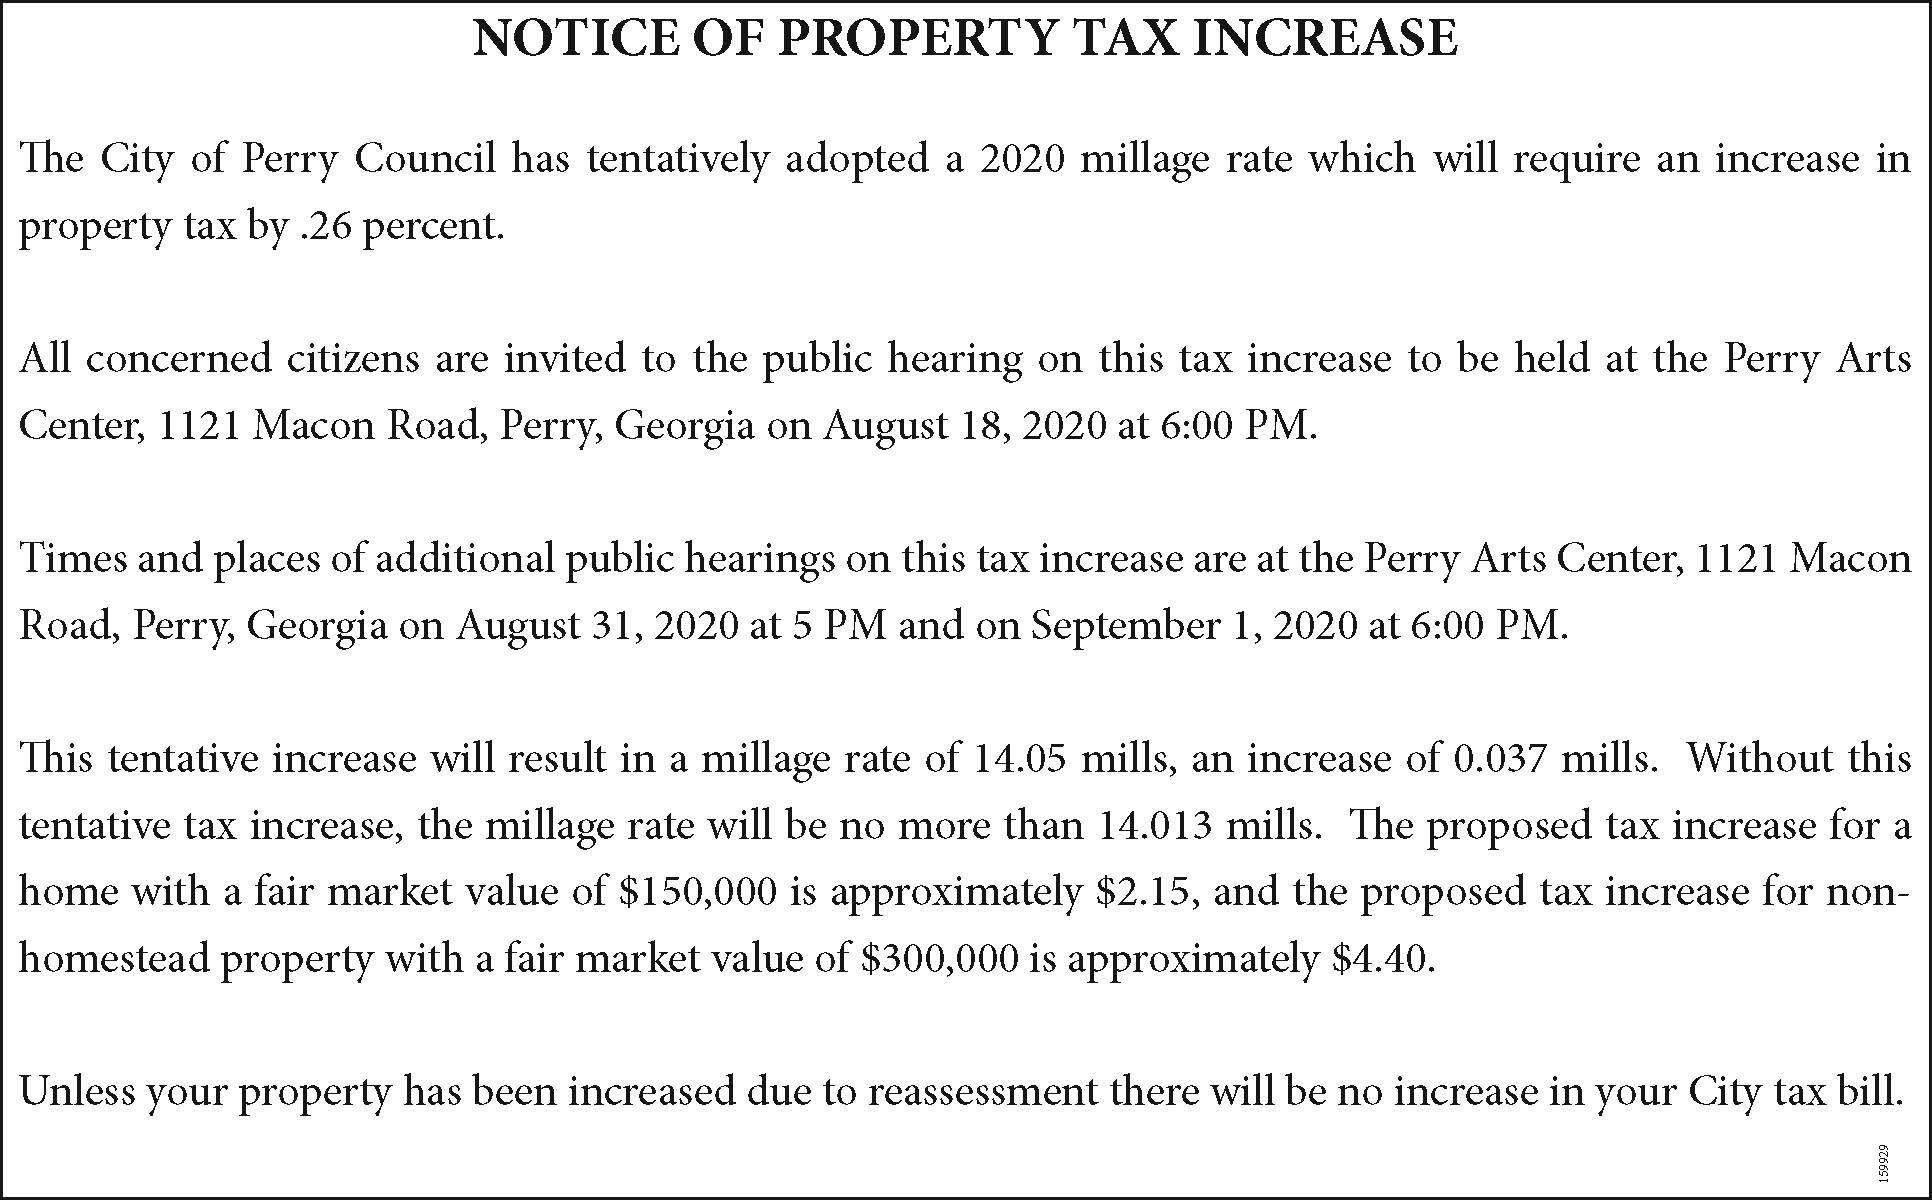 How To Fight A Property Tax Increase